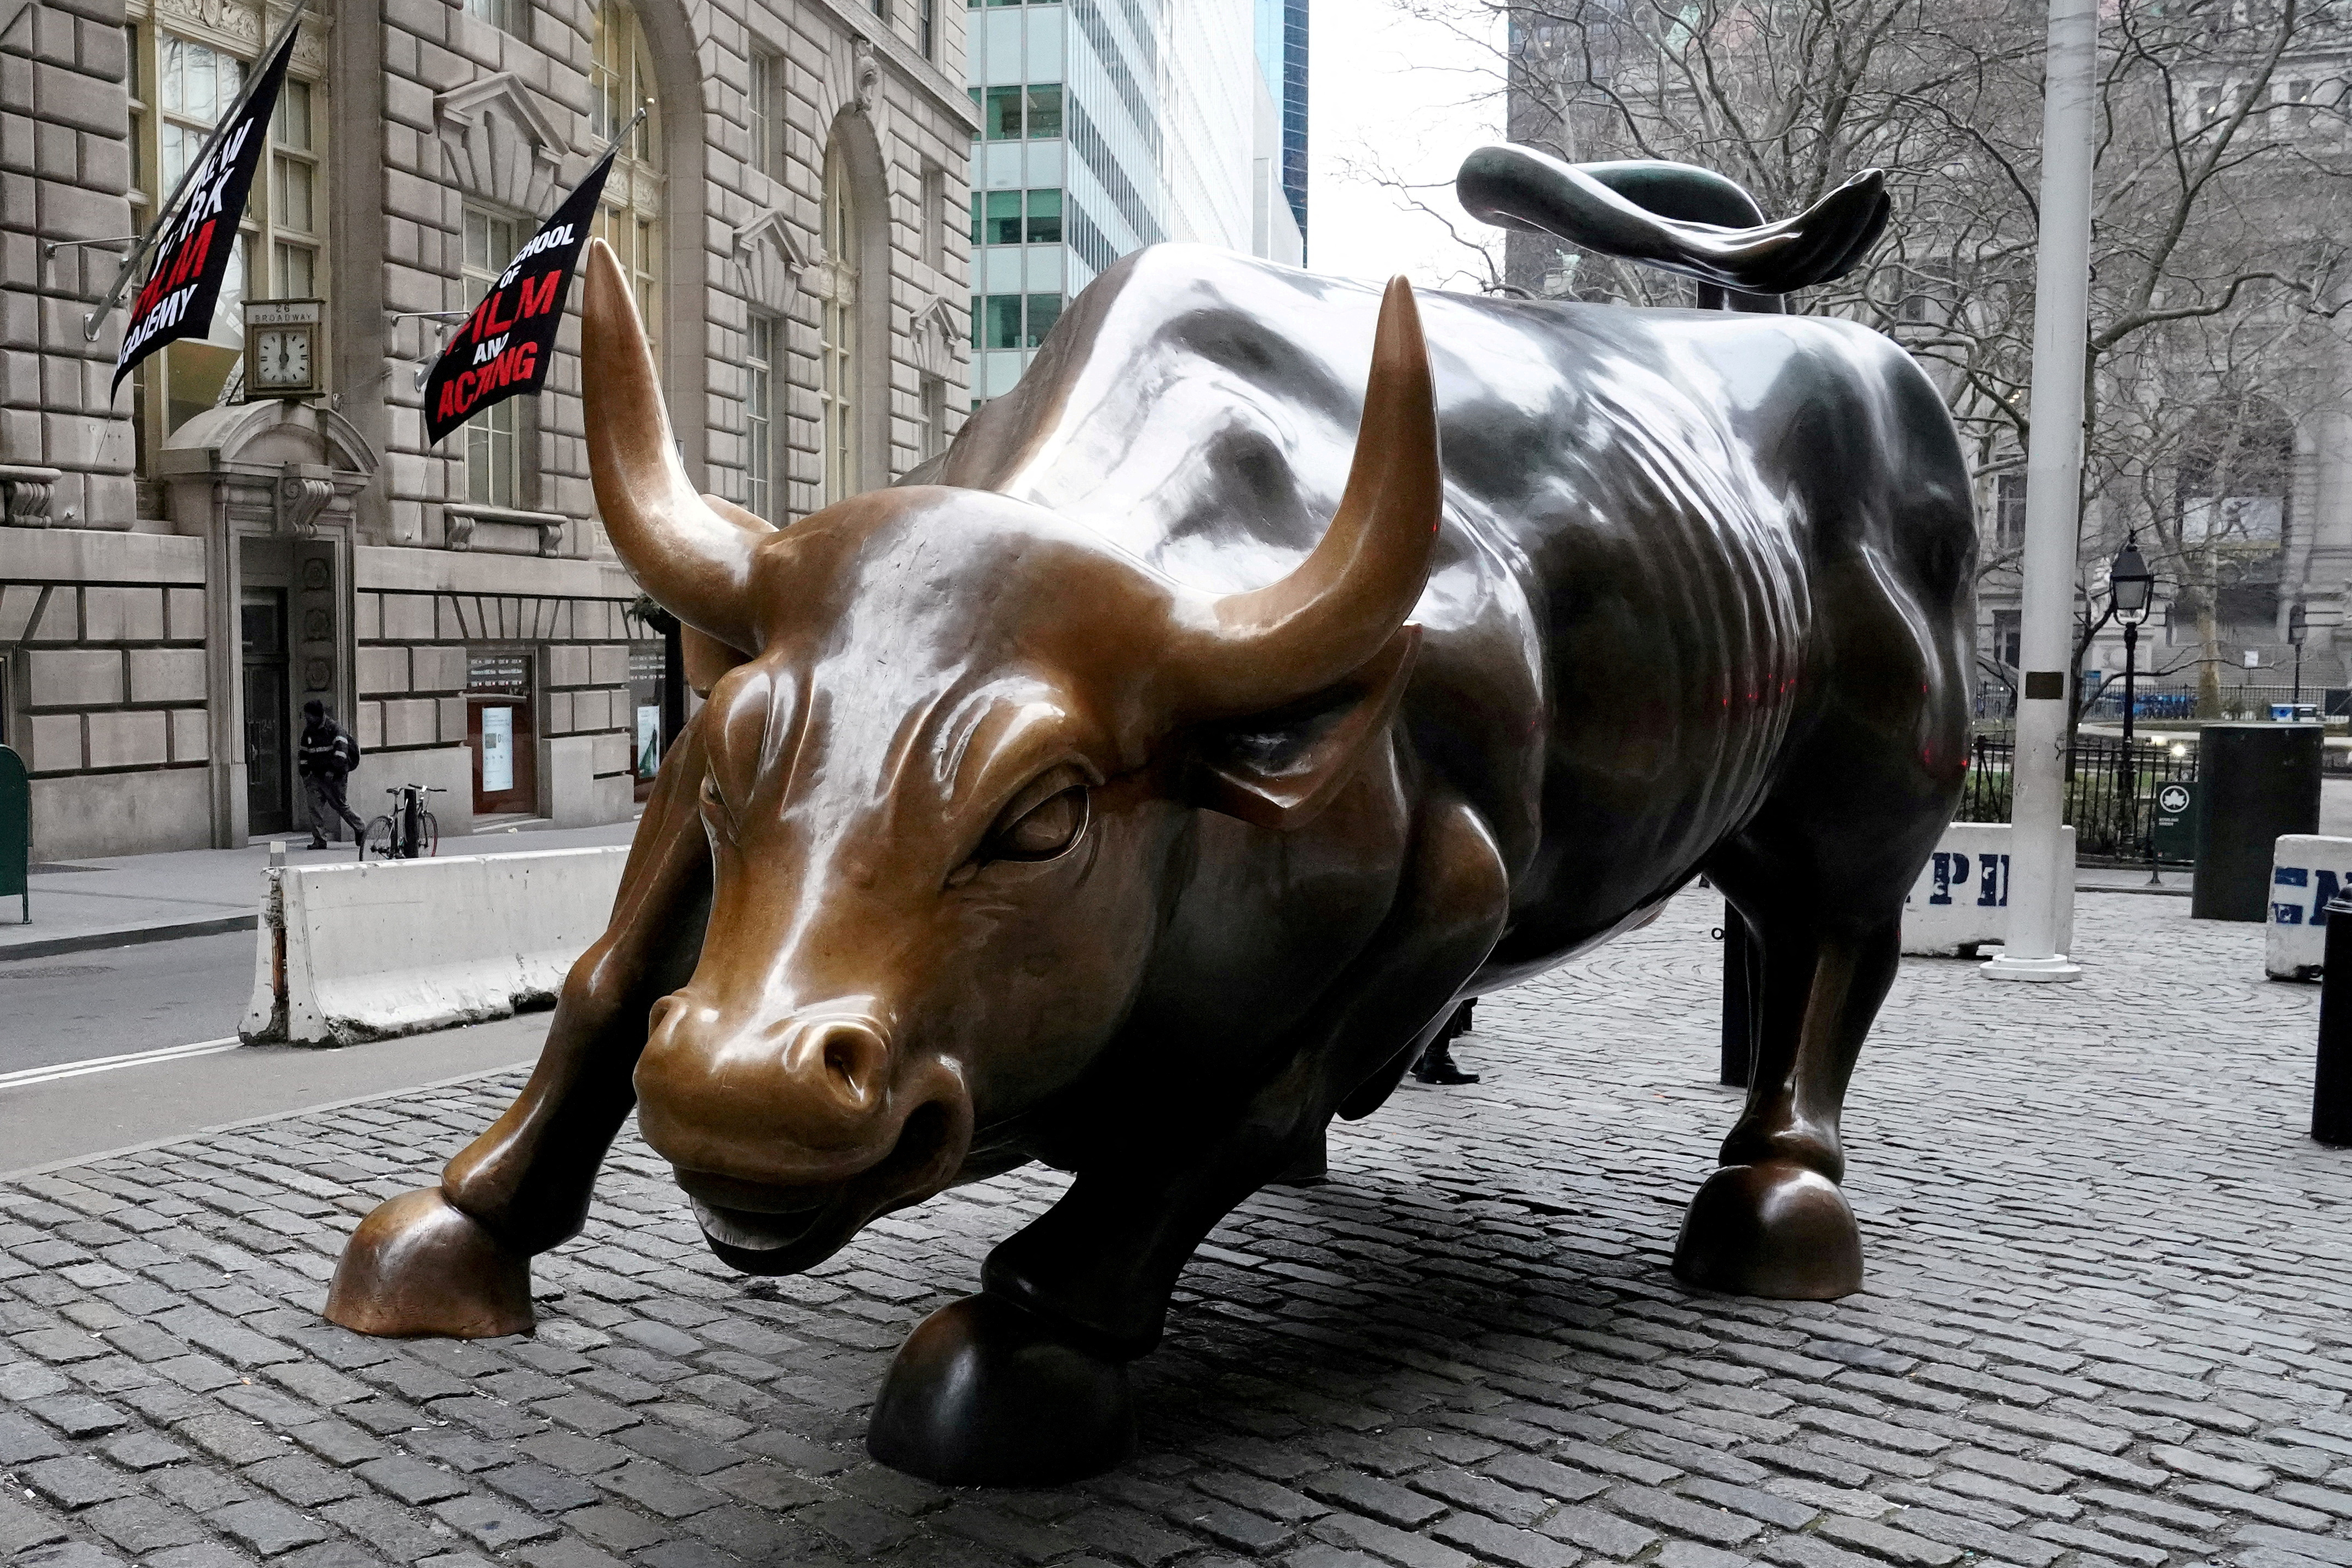 The Charging Bull of Wall Street Bull is pictured in the Manhattan borough of New York City